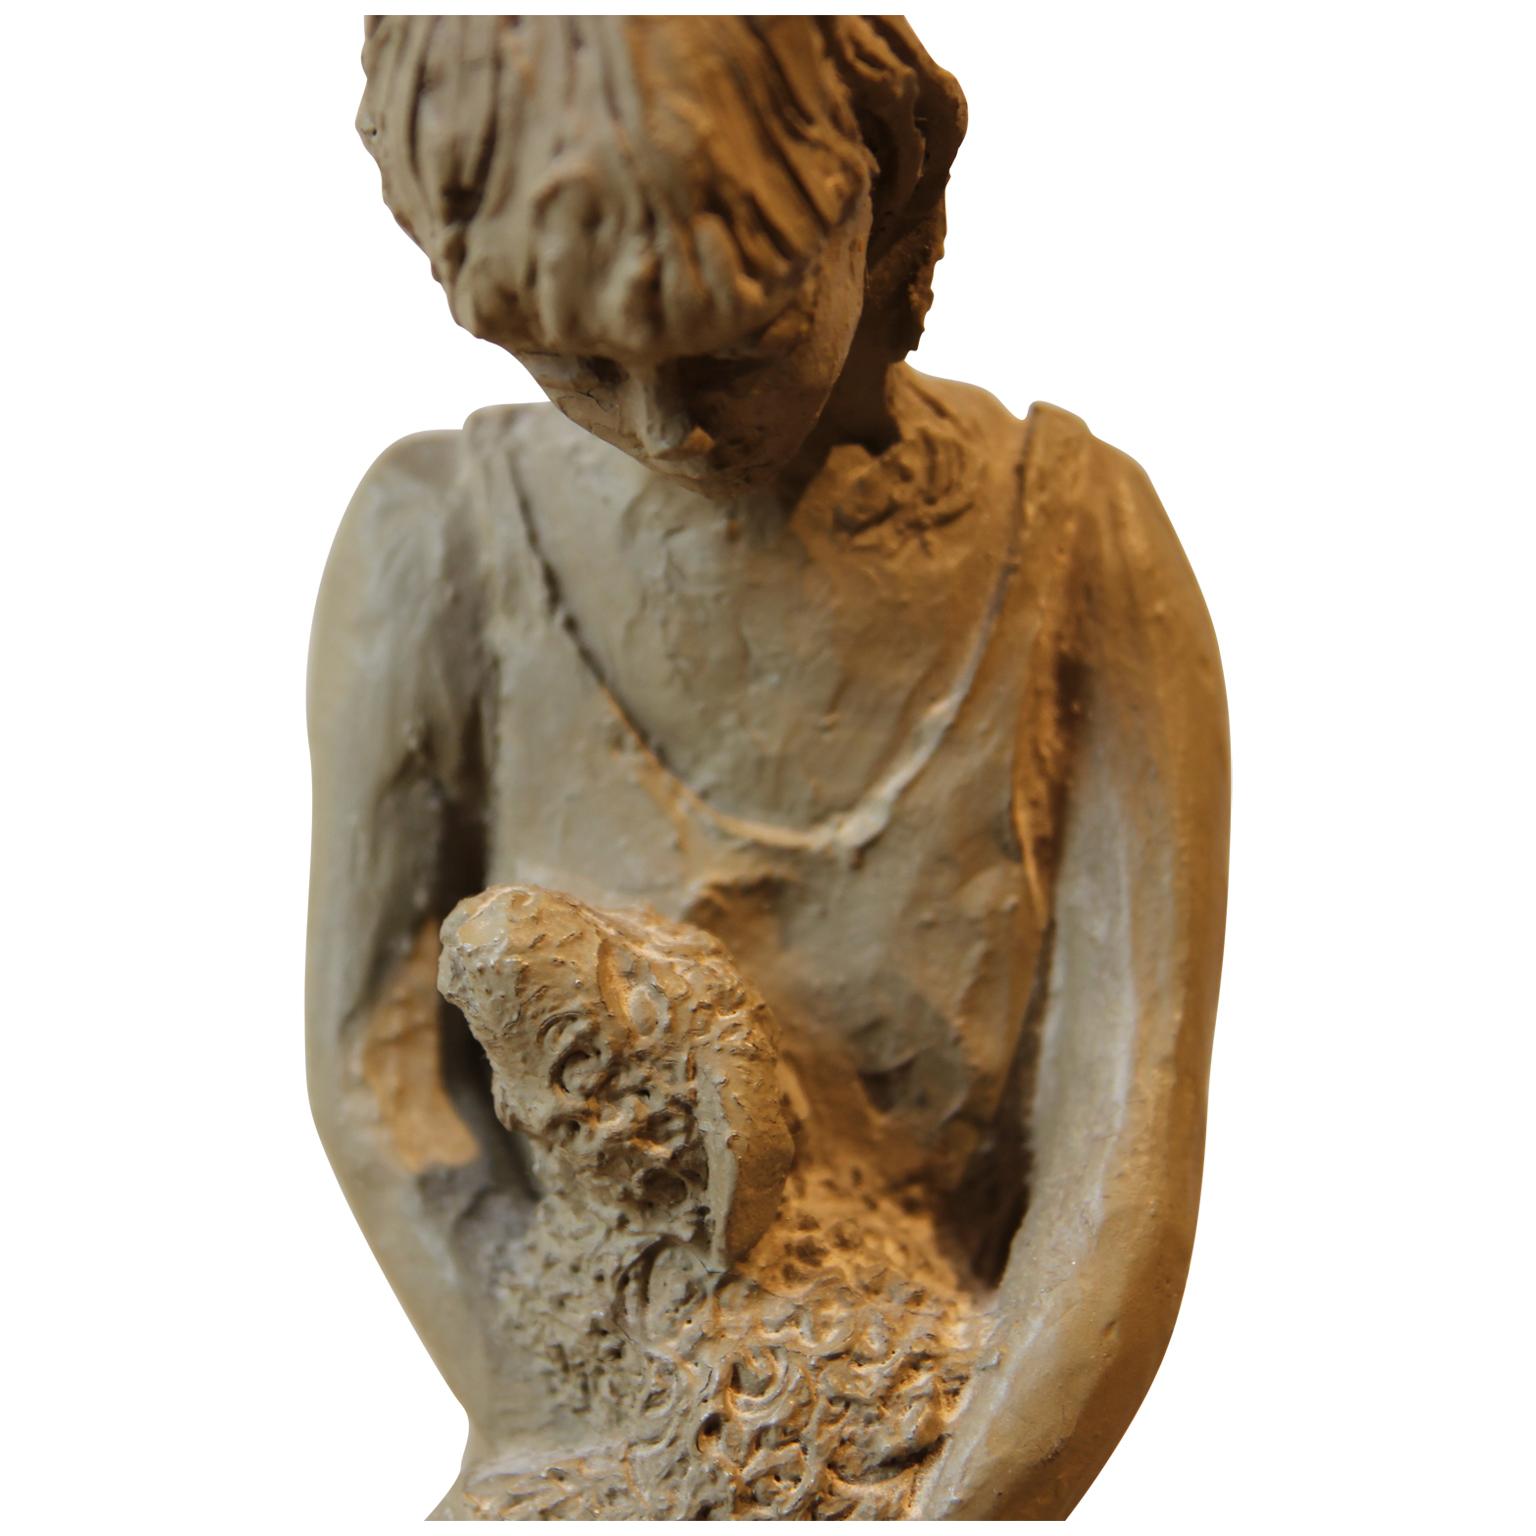 Naturalistic sculpture of a woman standing and holding a small calf. The sculpture is signed 